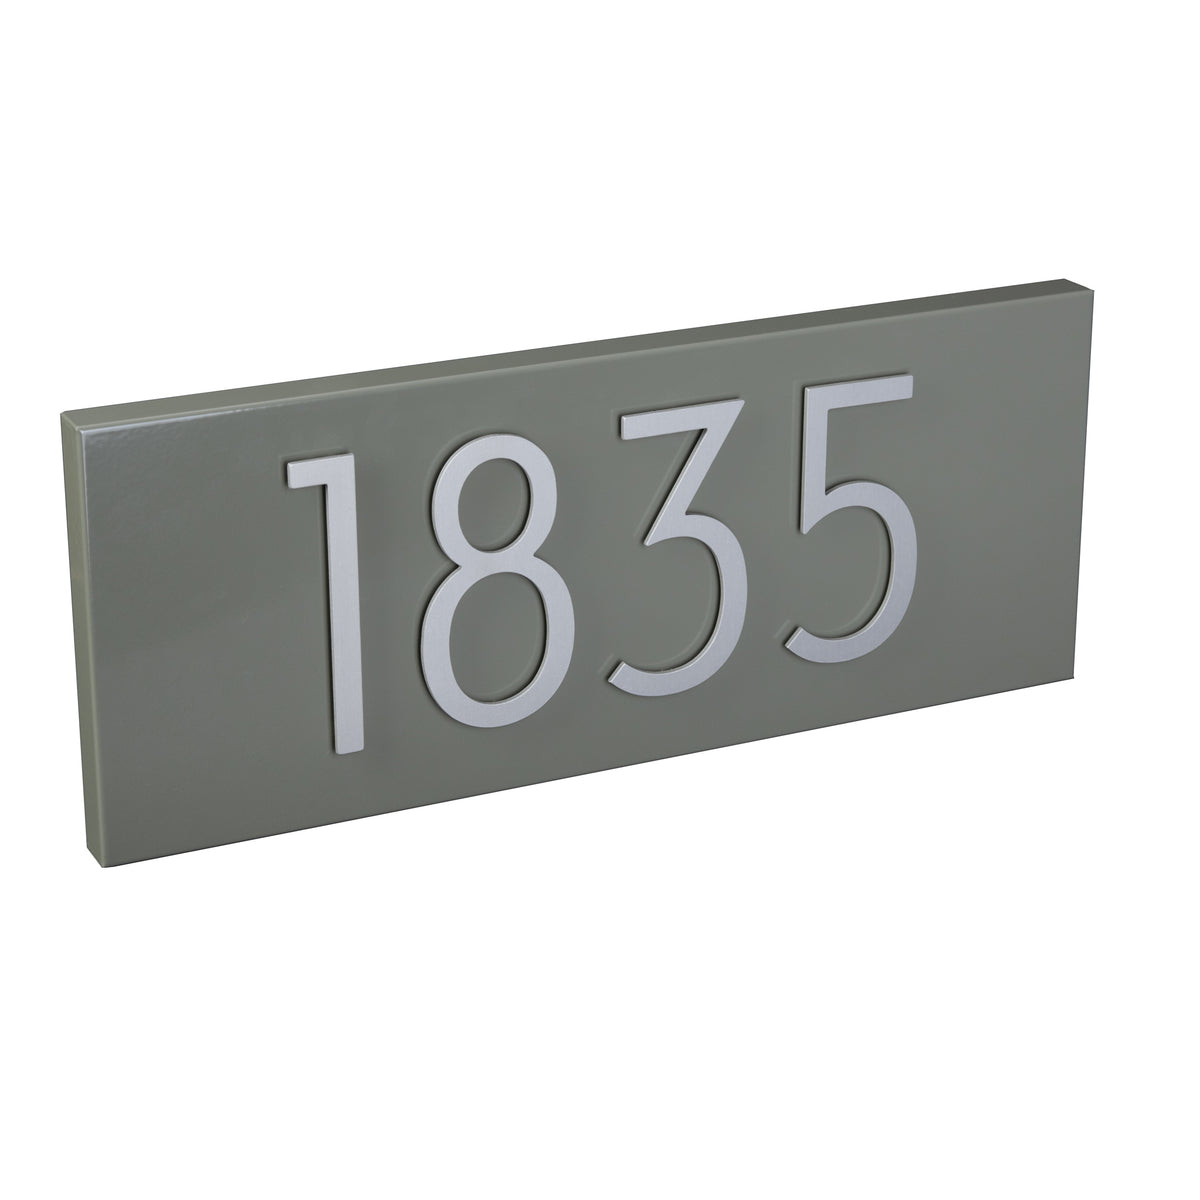 eucalyptus address plaque with silver numbers